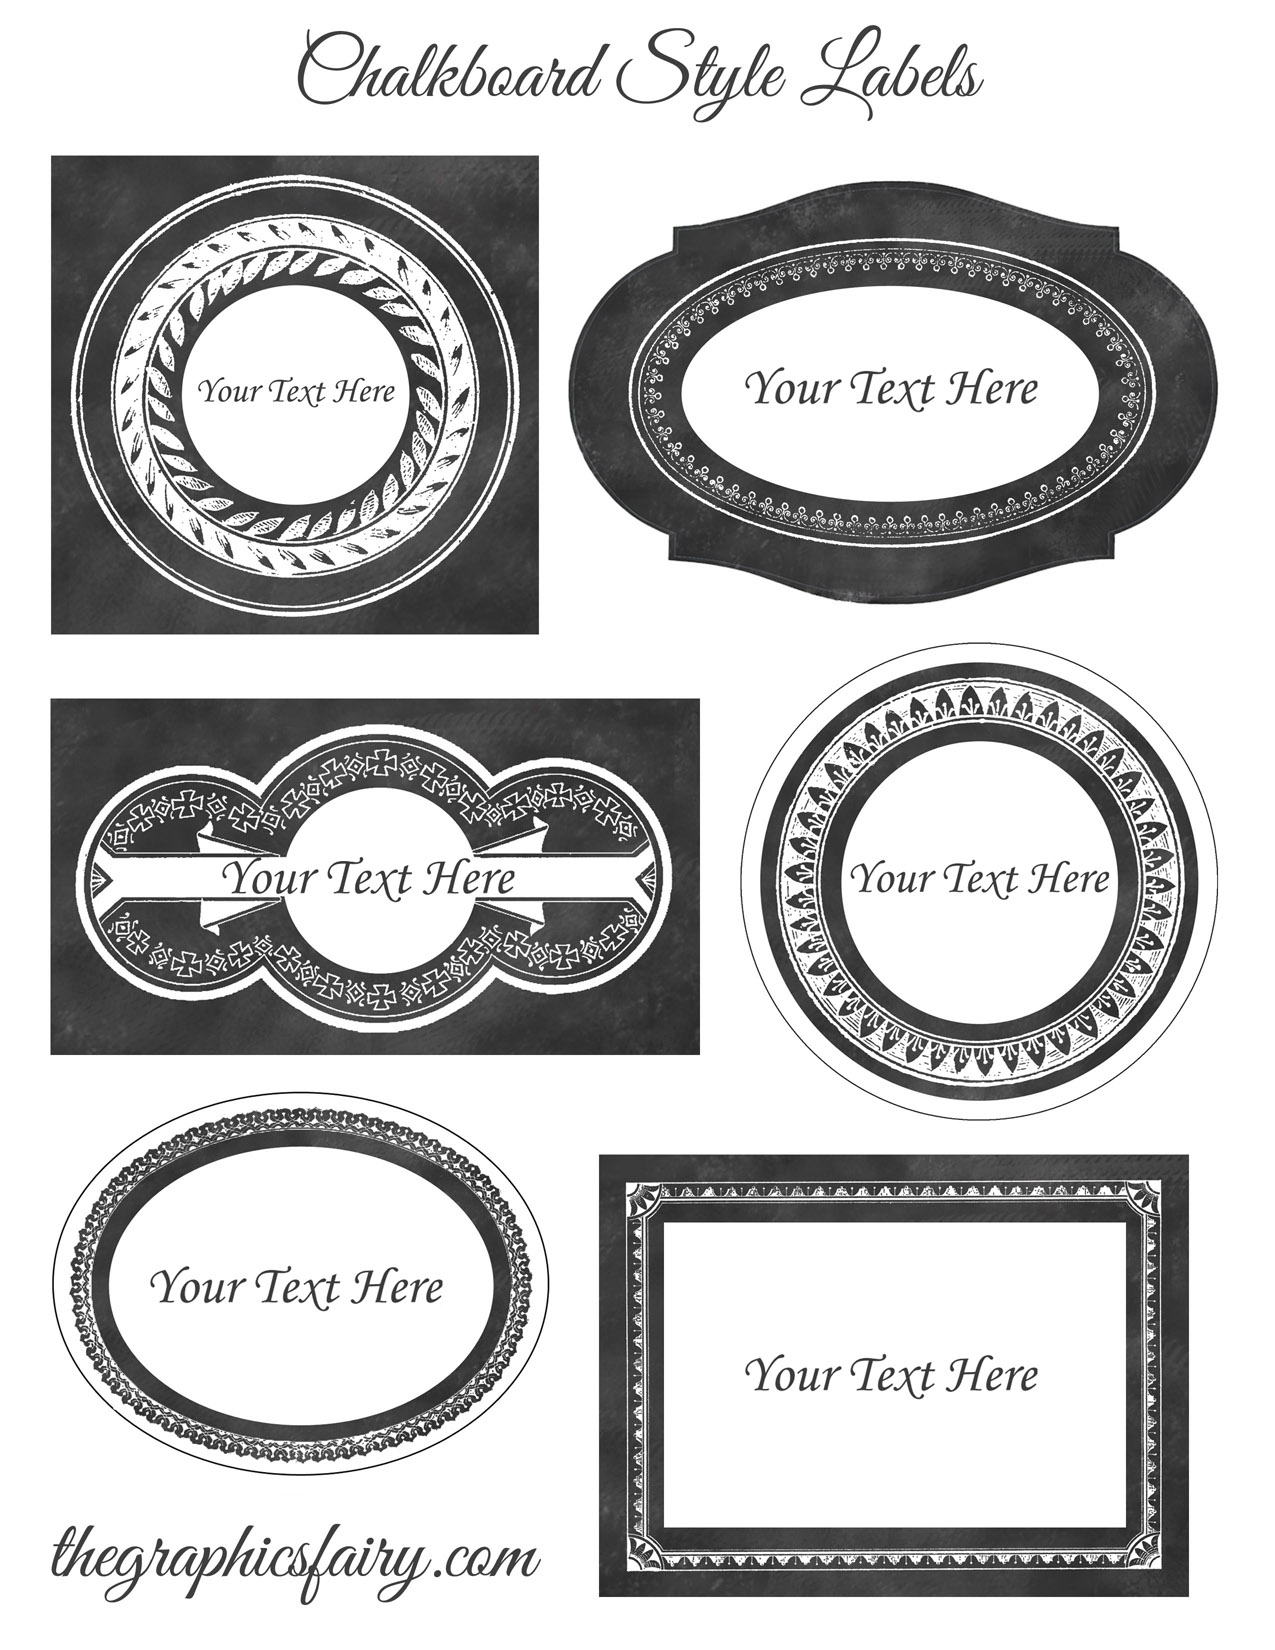 Chalkboard Style Printable Labels - Editable! - The Graphics Fairy - Free Printable Labels